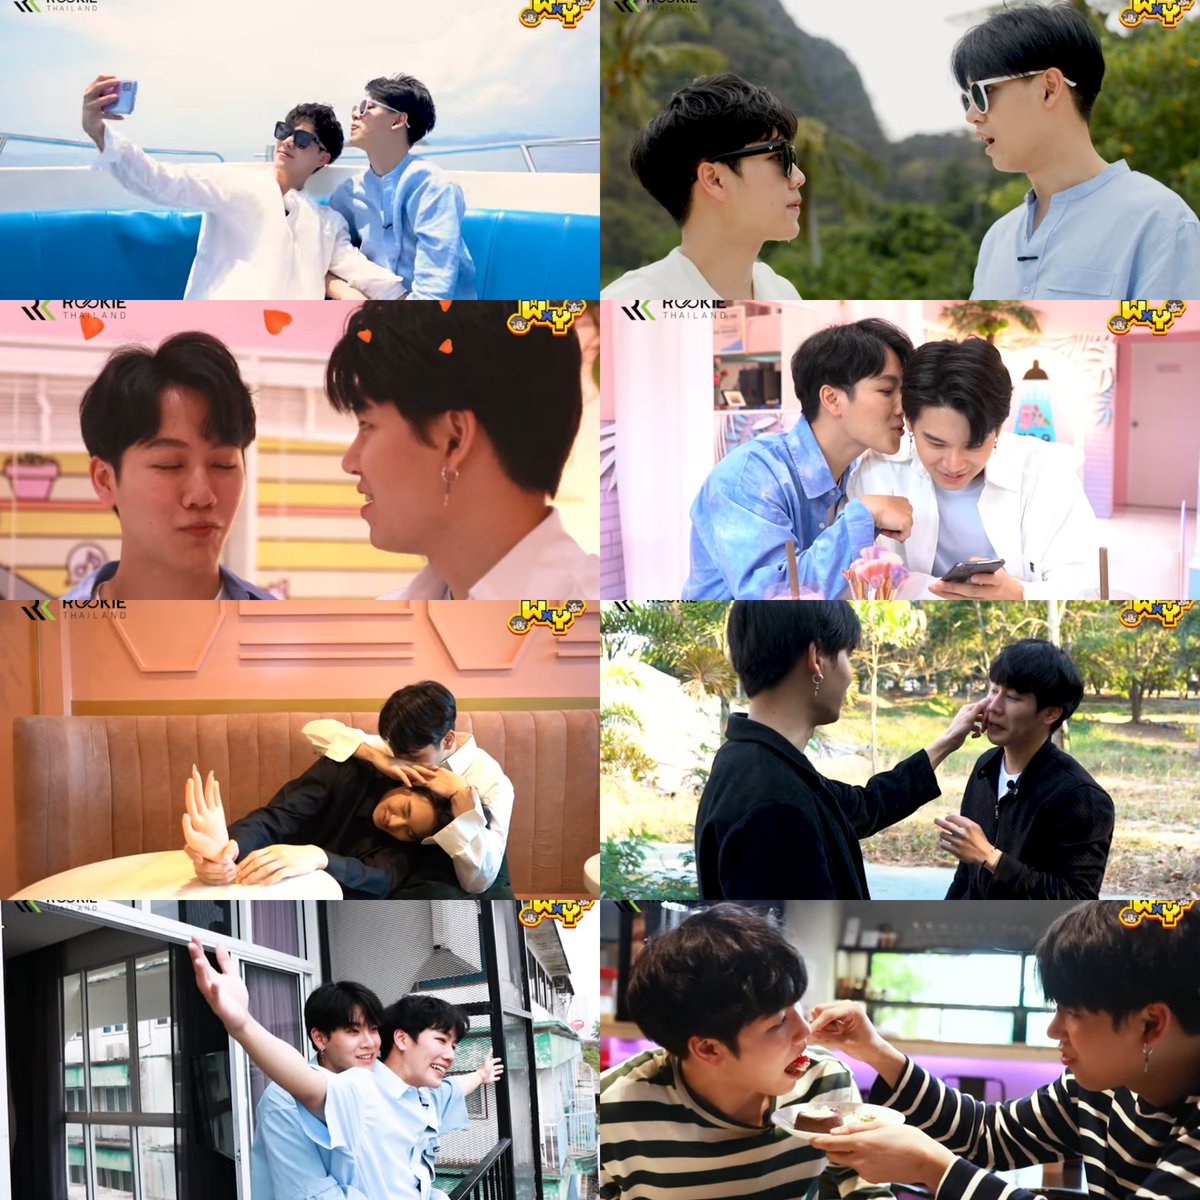 "But mostly, it's improvised"So, is this what improvised is? From those who act weird, to those that are full of sweetness. All of that based on your feelingsReplay previous episodes. Hoping there will be more episodes  #WxYep10  #yinyin_anw  #warwanarat  #yinwar  #หยิ่นวอร์